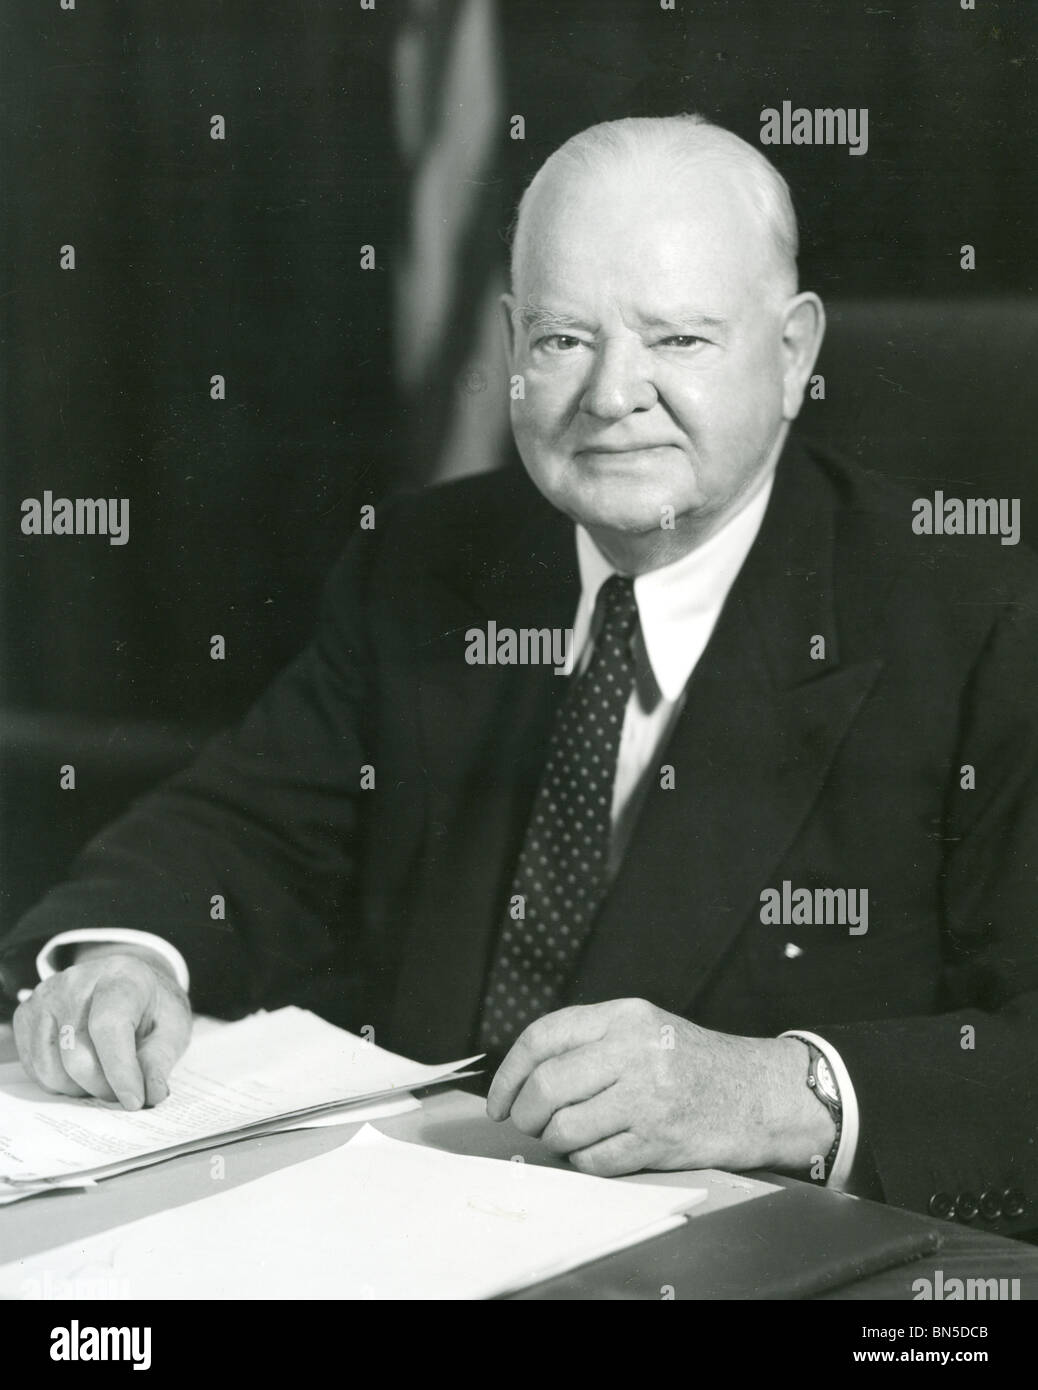 New 5x7 Photo Herbert Hoover 31st President of the United States 